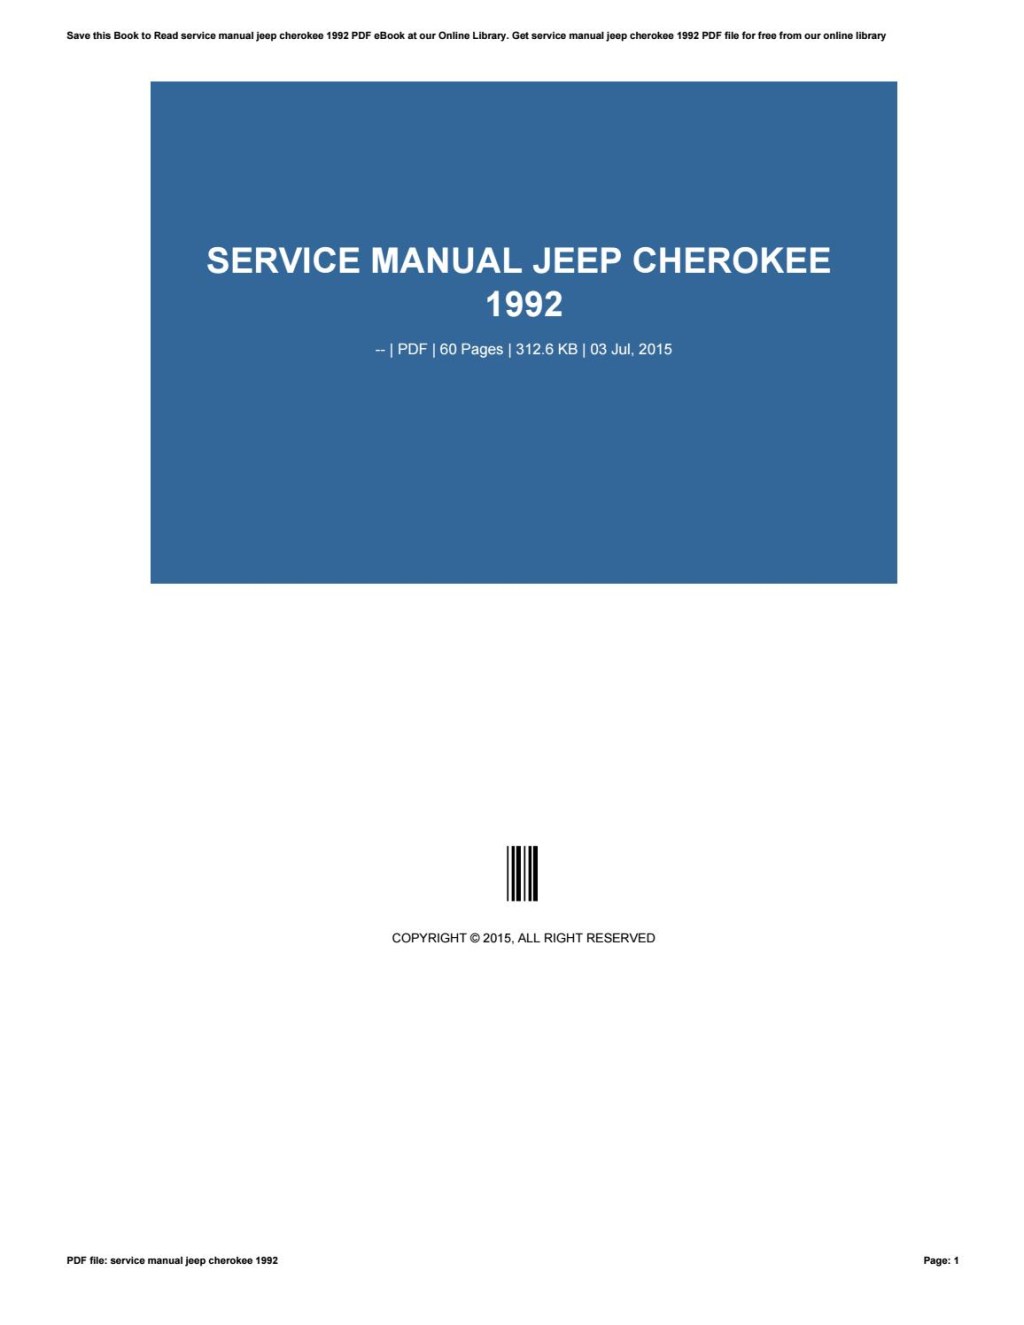 Picture of: Service manual jeep cherokee  by mb – Issuu